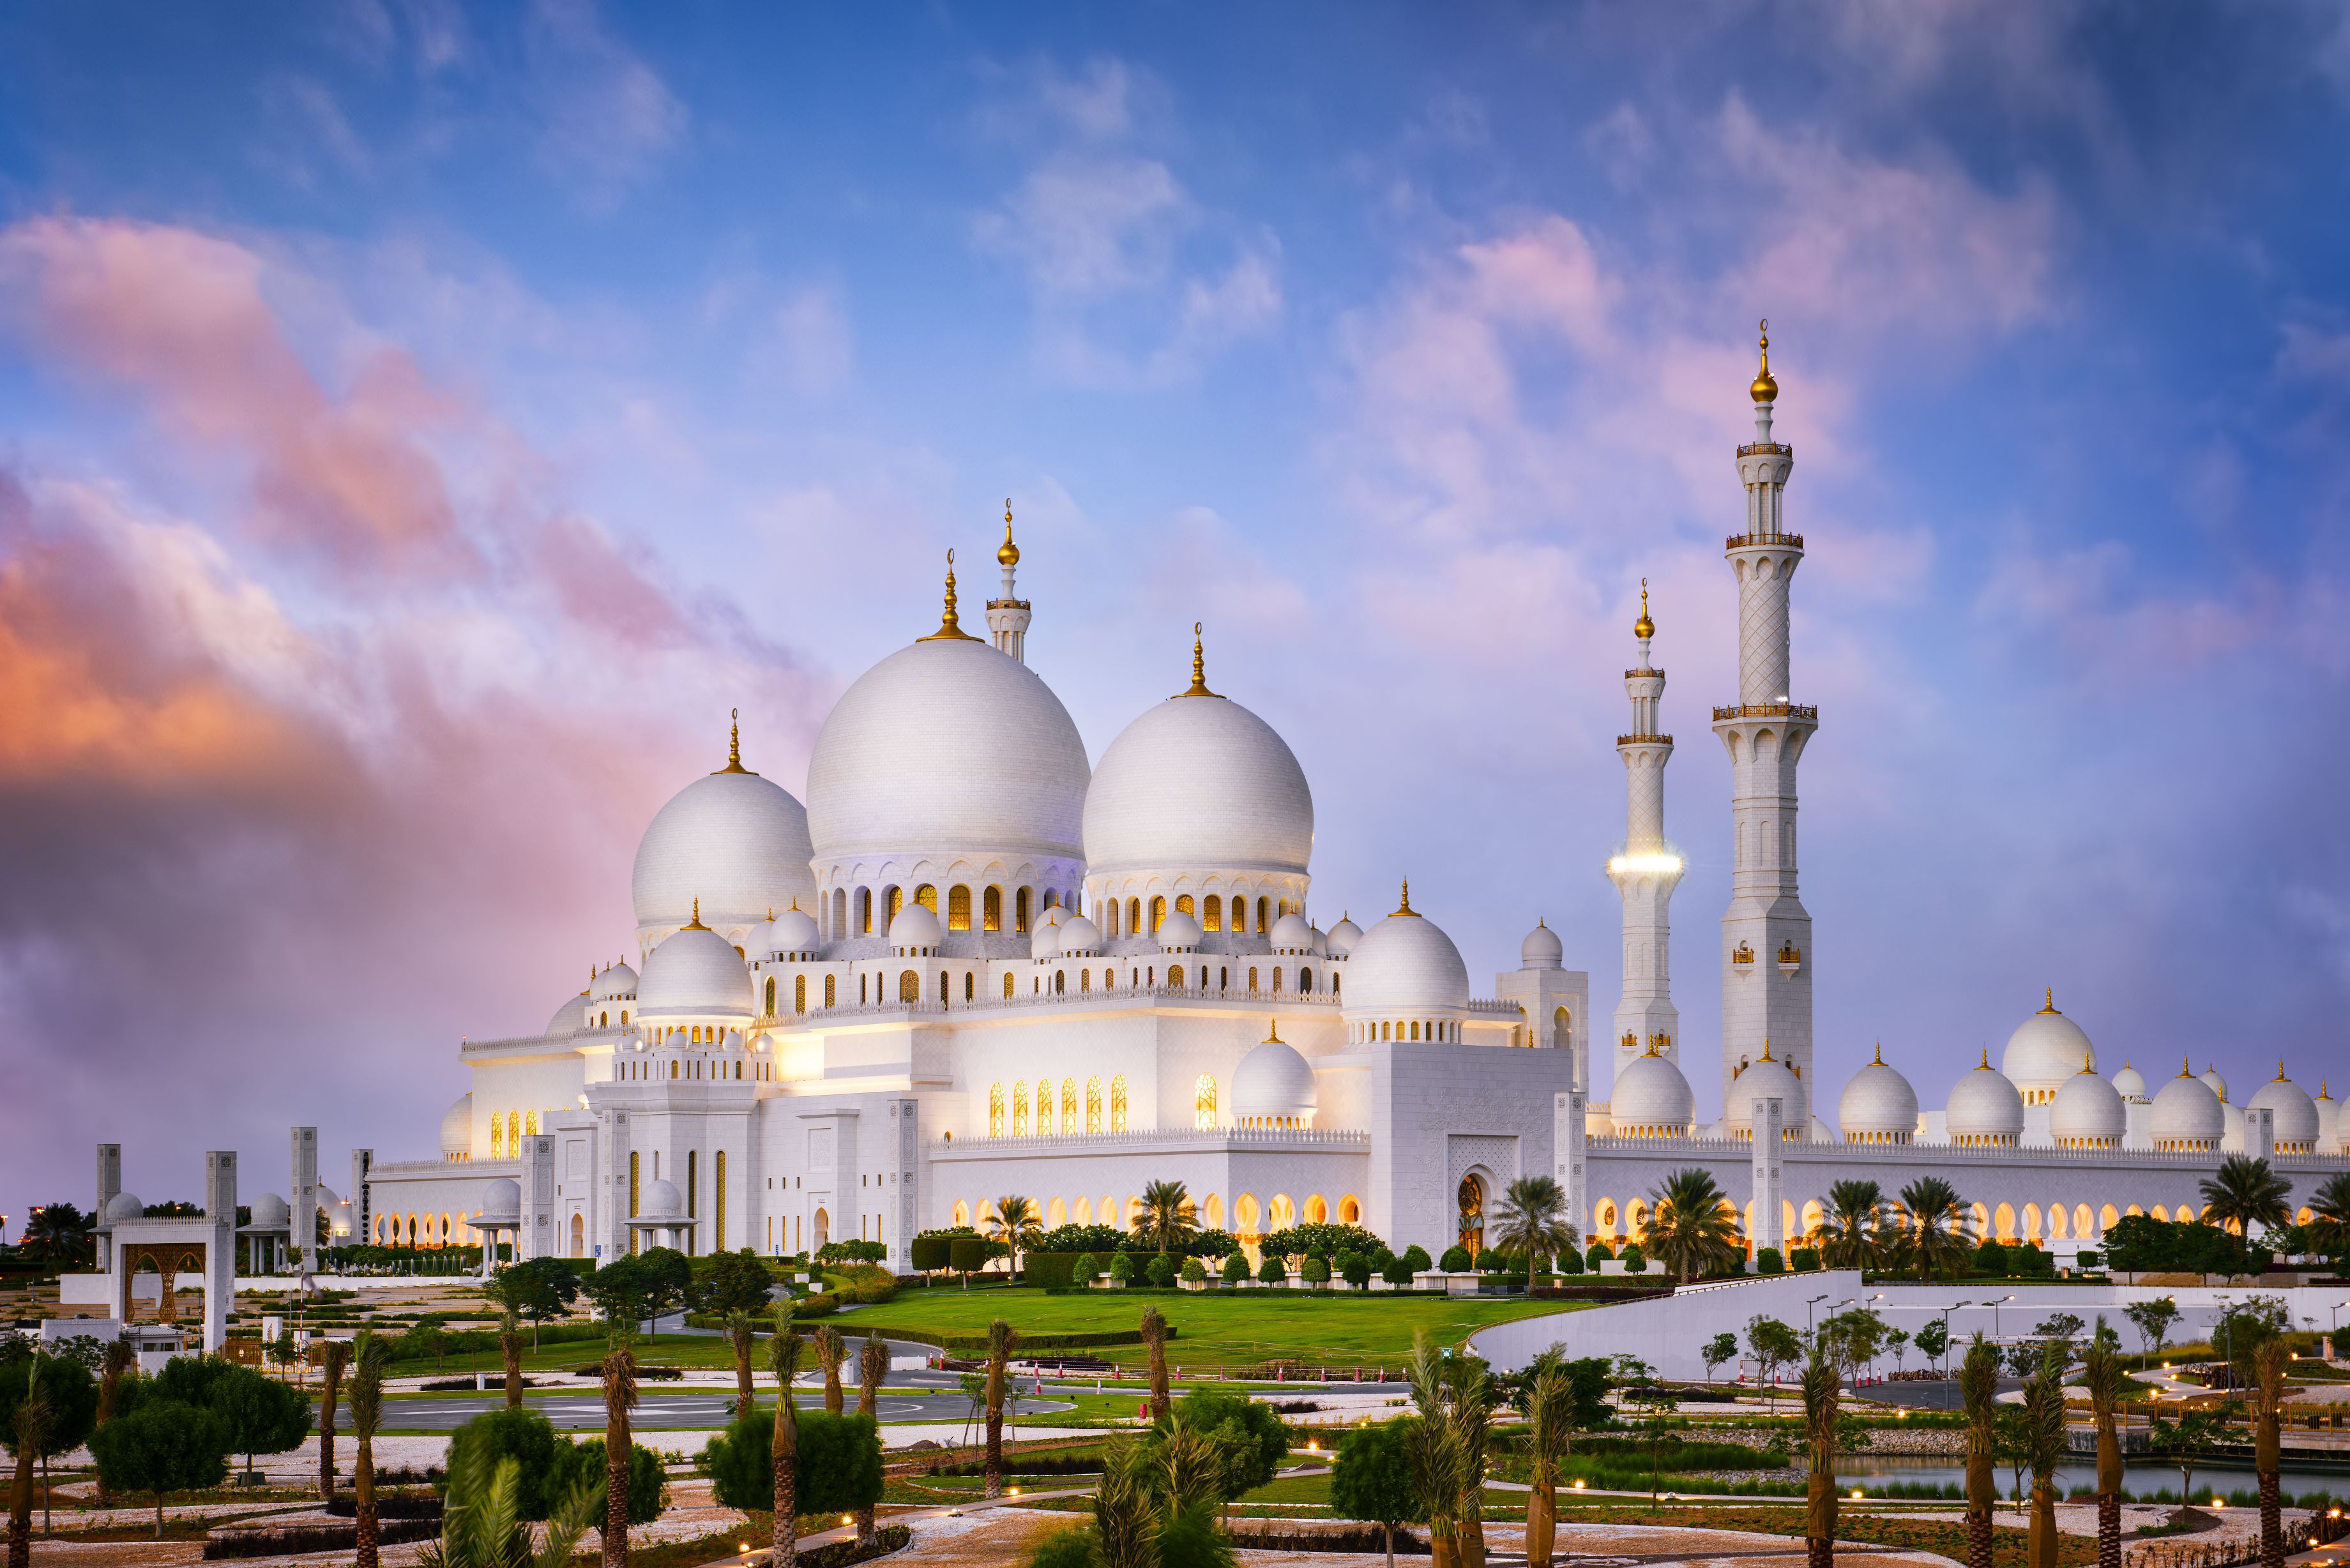 Tour Sheikh Zayed Grand Mosque And Louvre, Stop At Yas Viceroy For Refreshment - Travel Fube